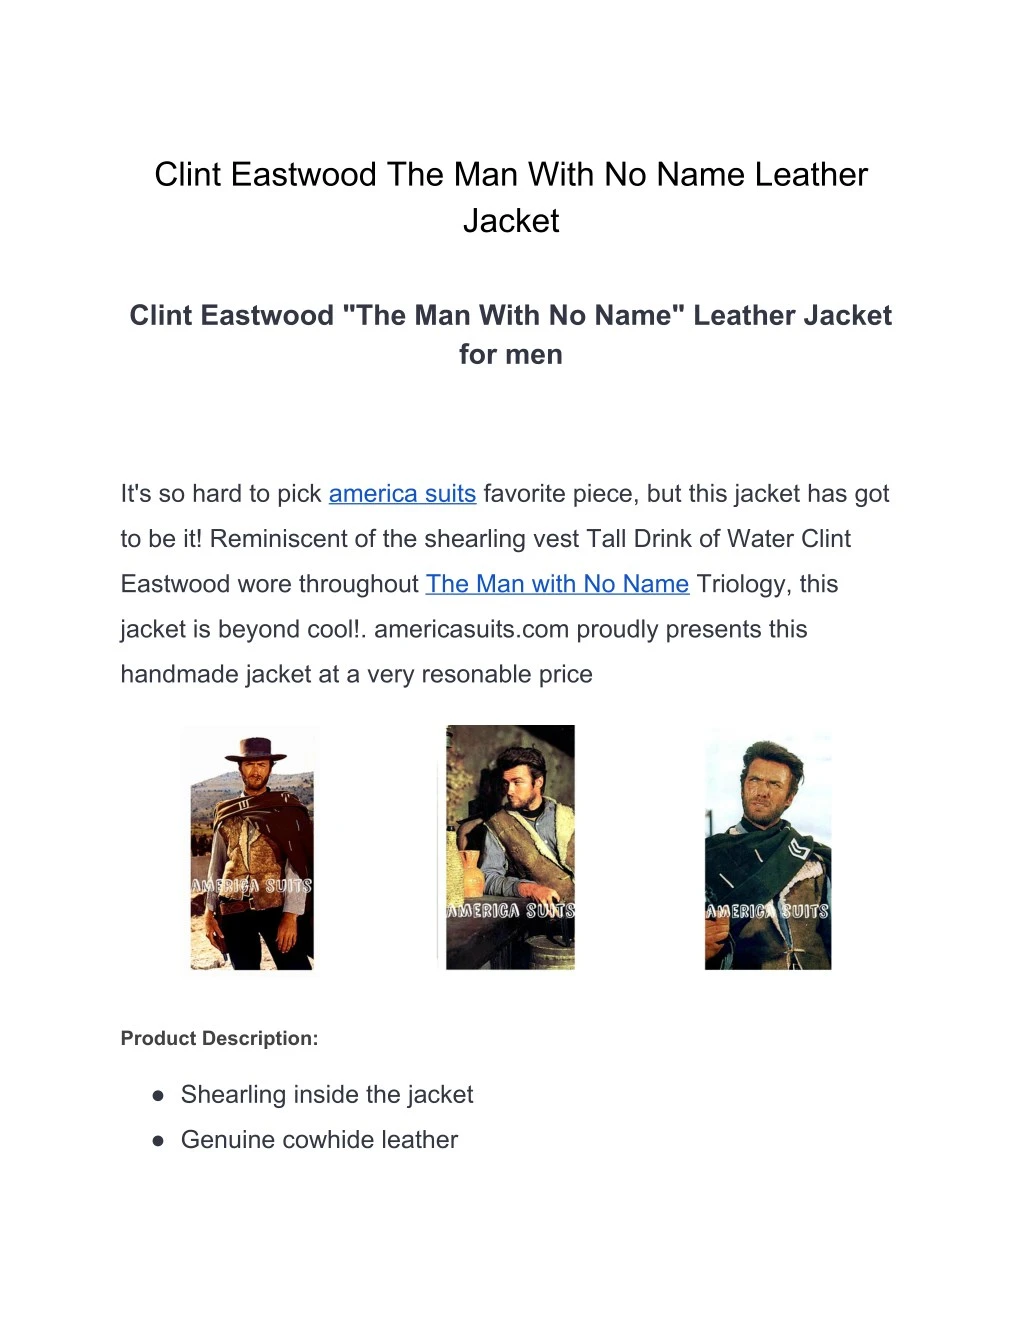 clint eastwood the man with no name leather jacket